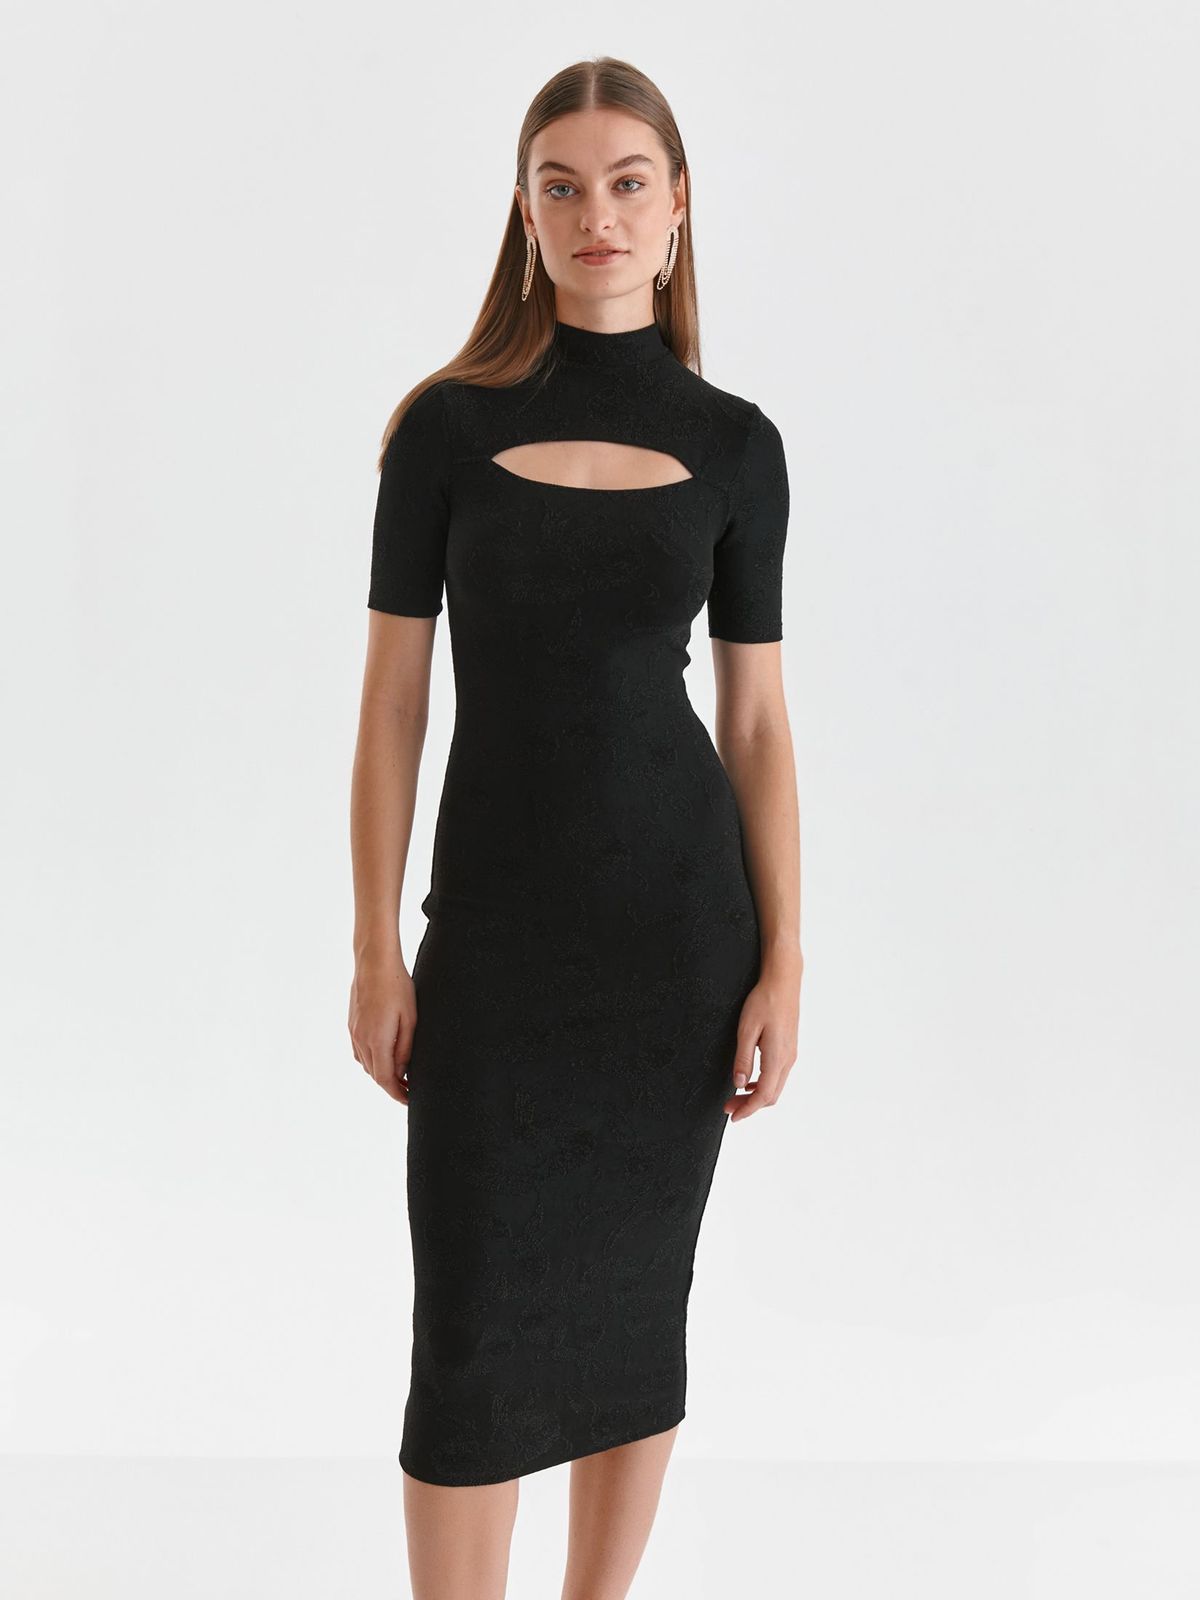 Black dress knitted midi pencil cut-out bust design